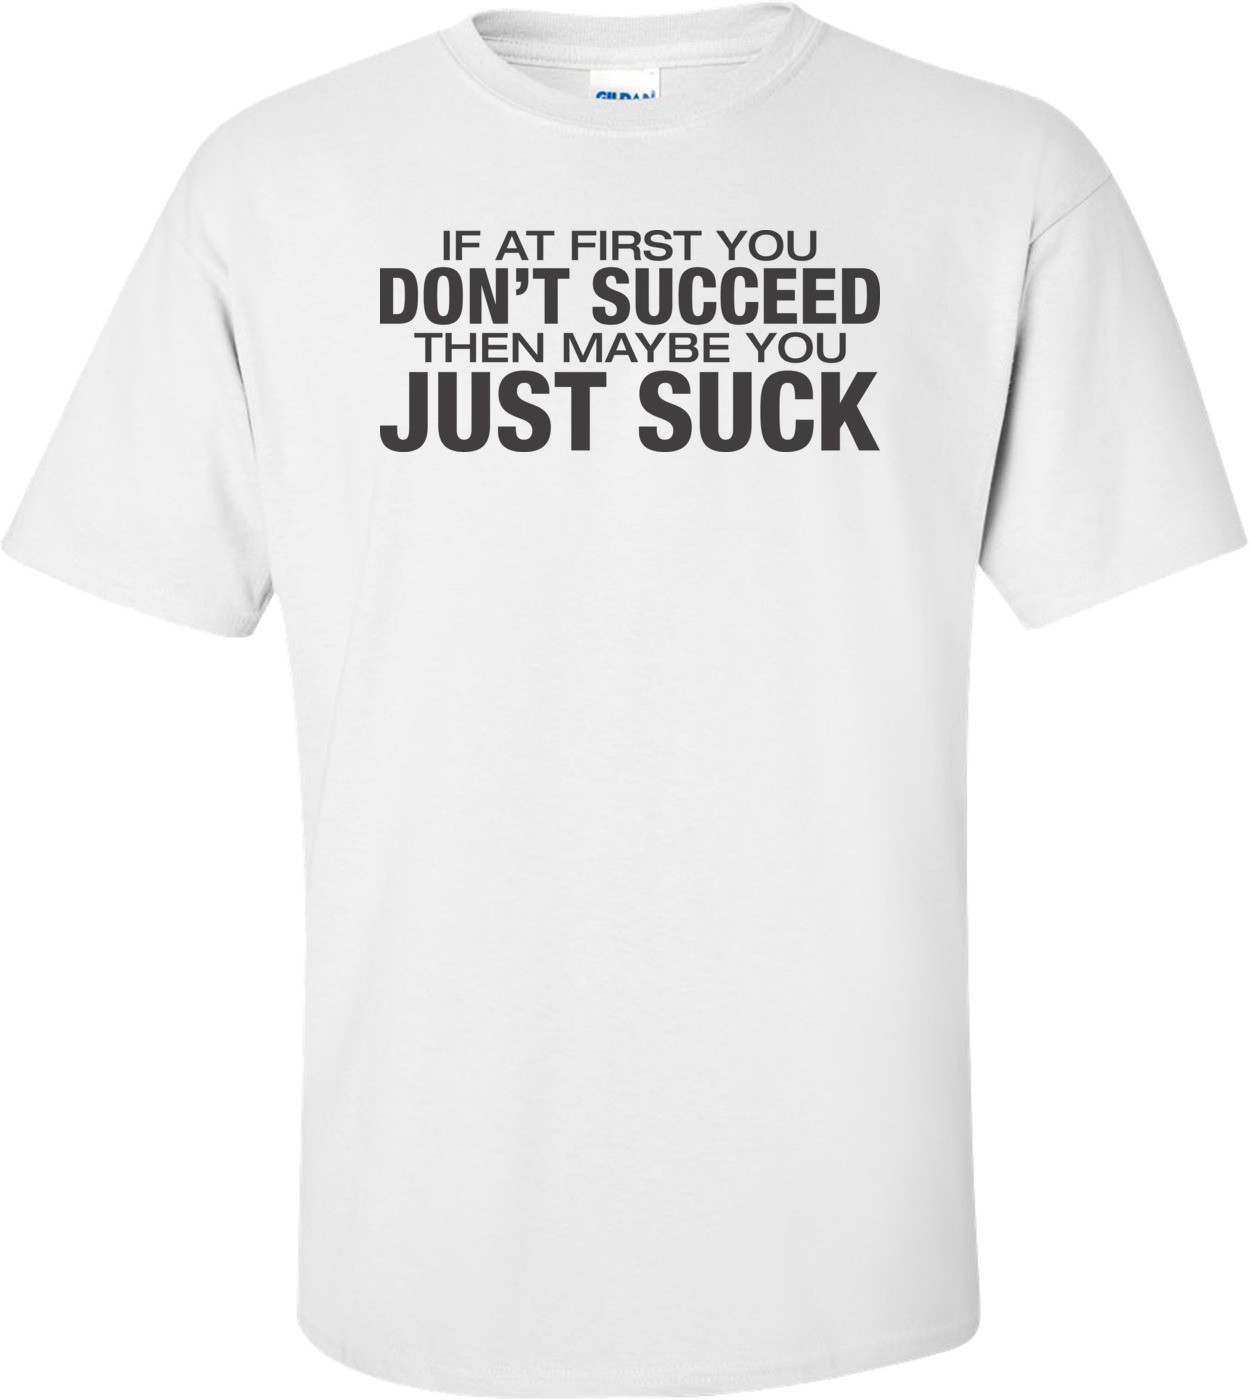 If At First You Don't Succeed Then Maybe You Just Suck T-shirt